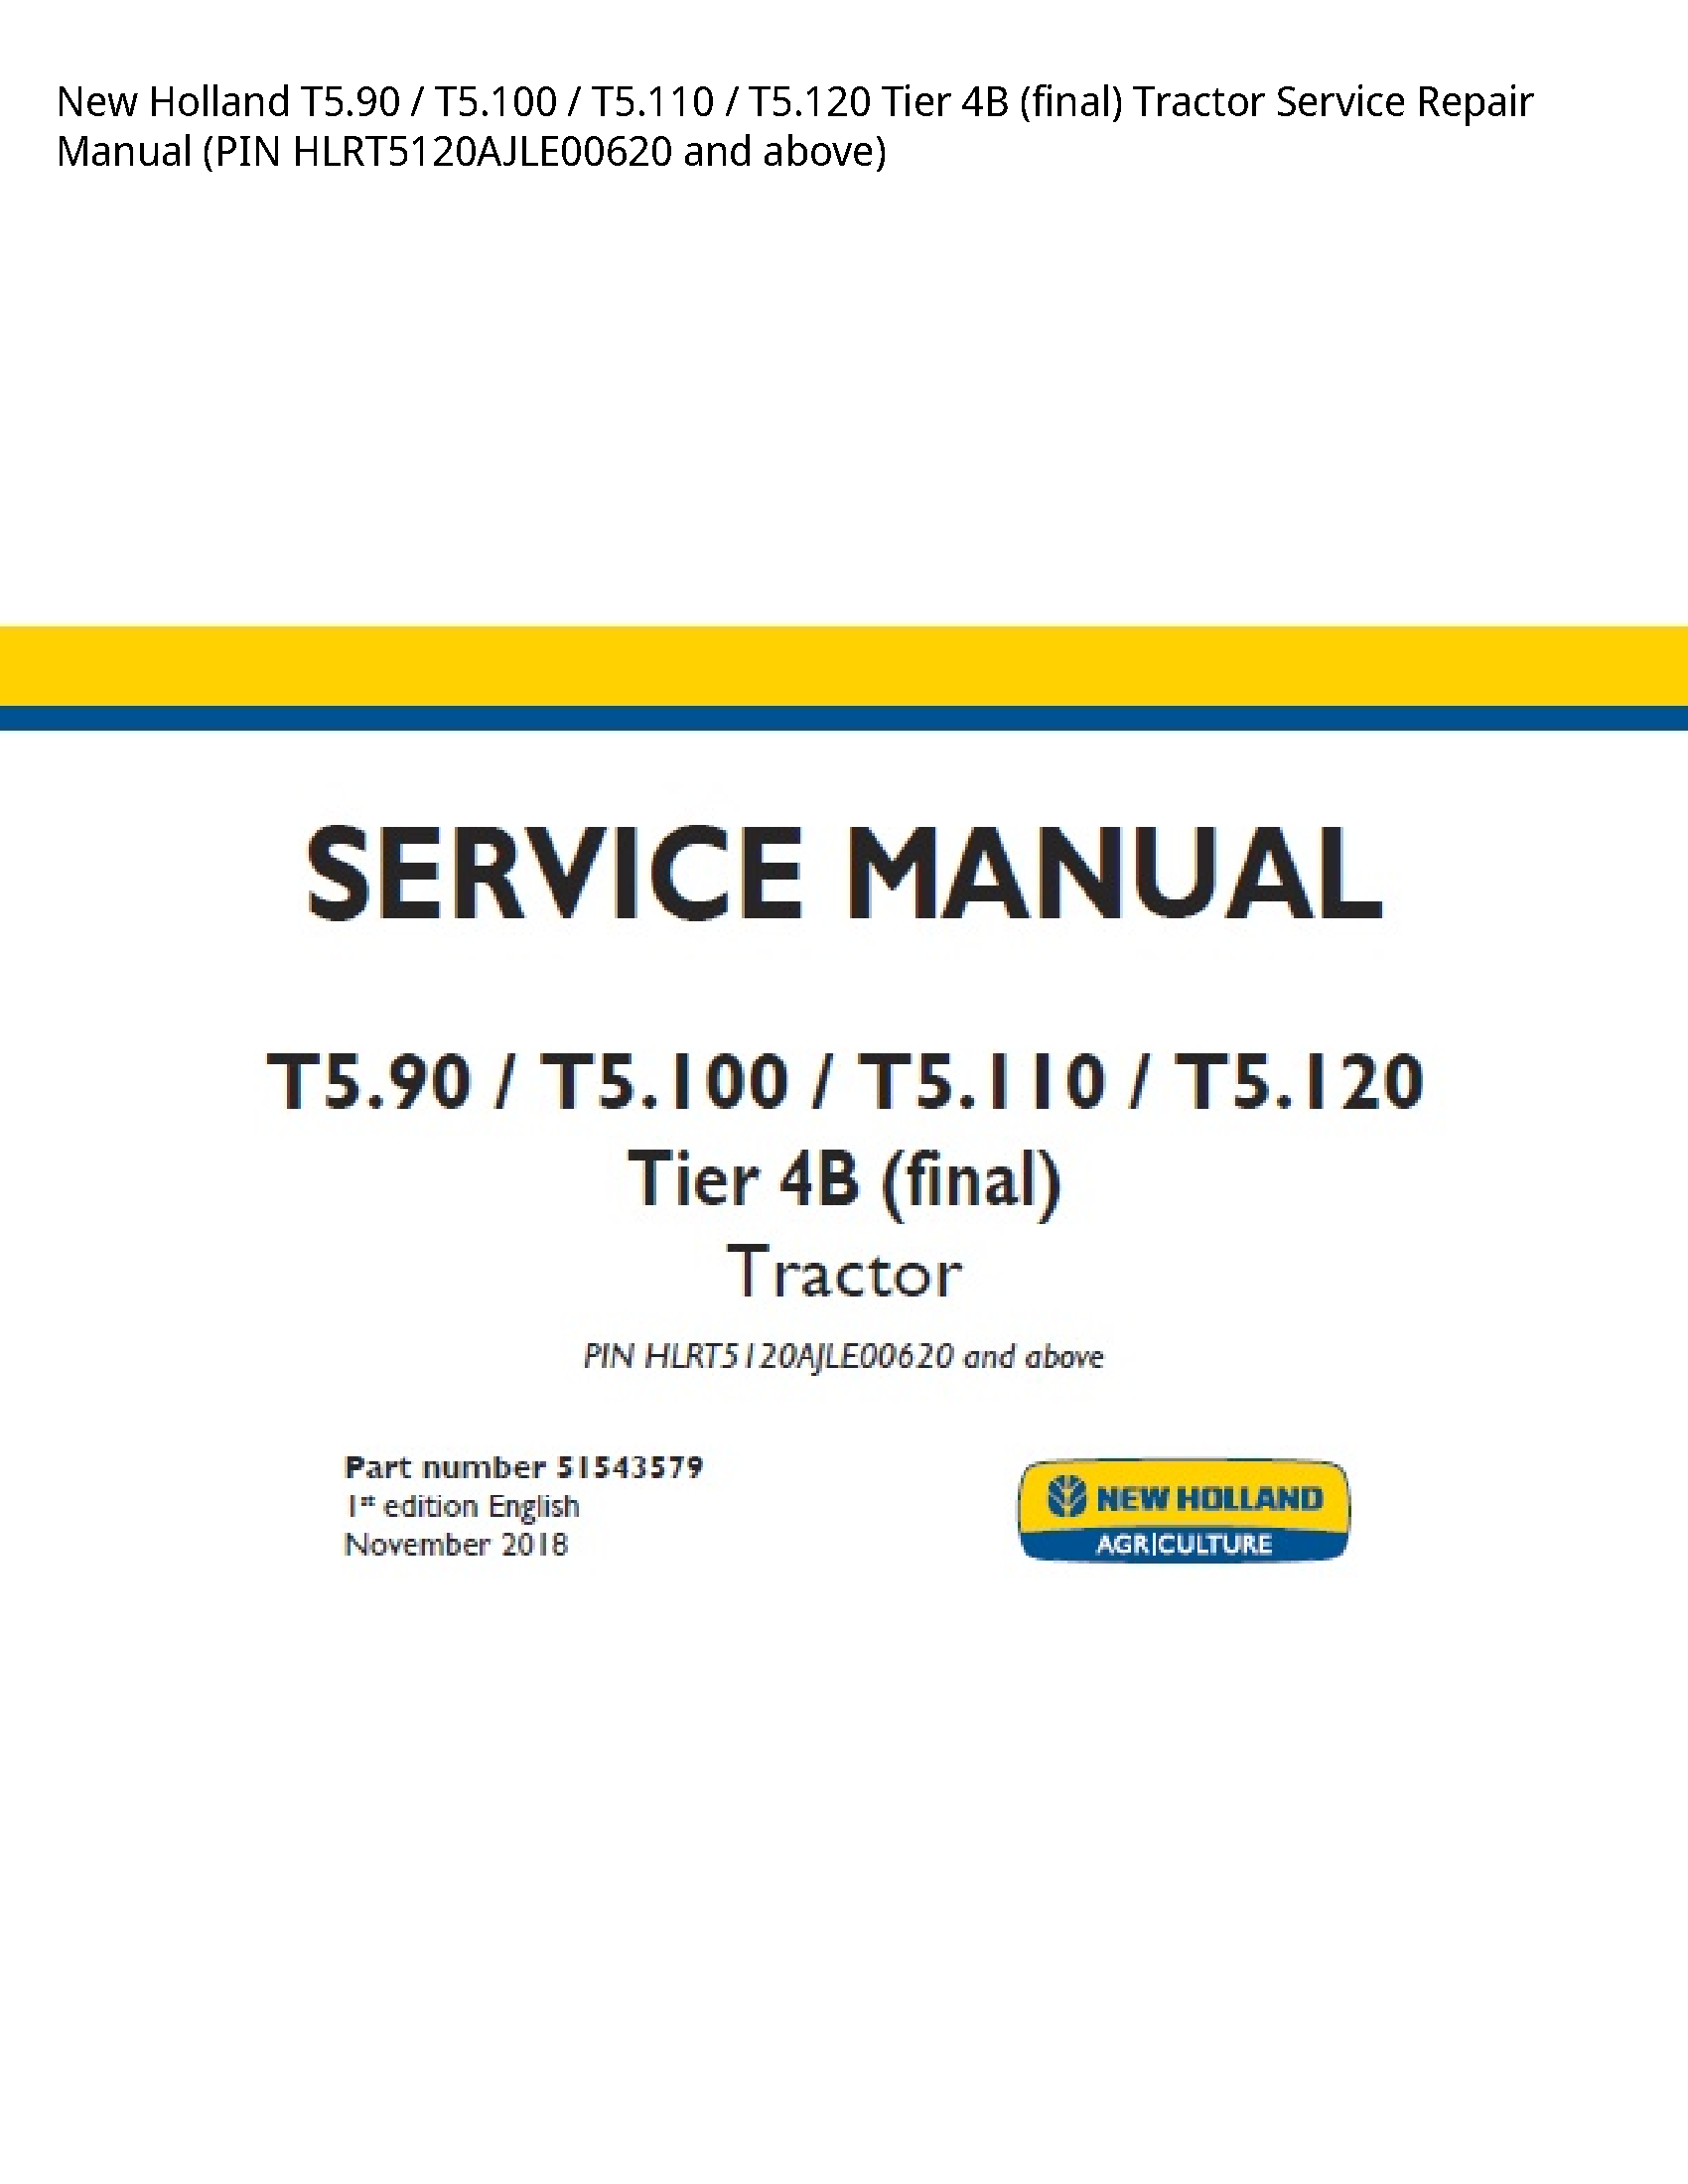 New Holland T5.90 Tier (final) Tractor manual